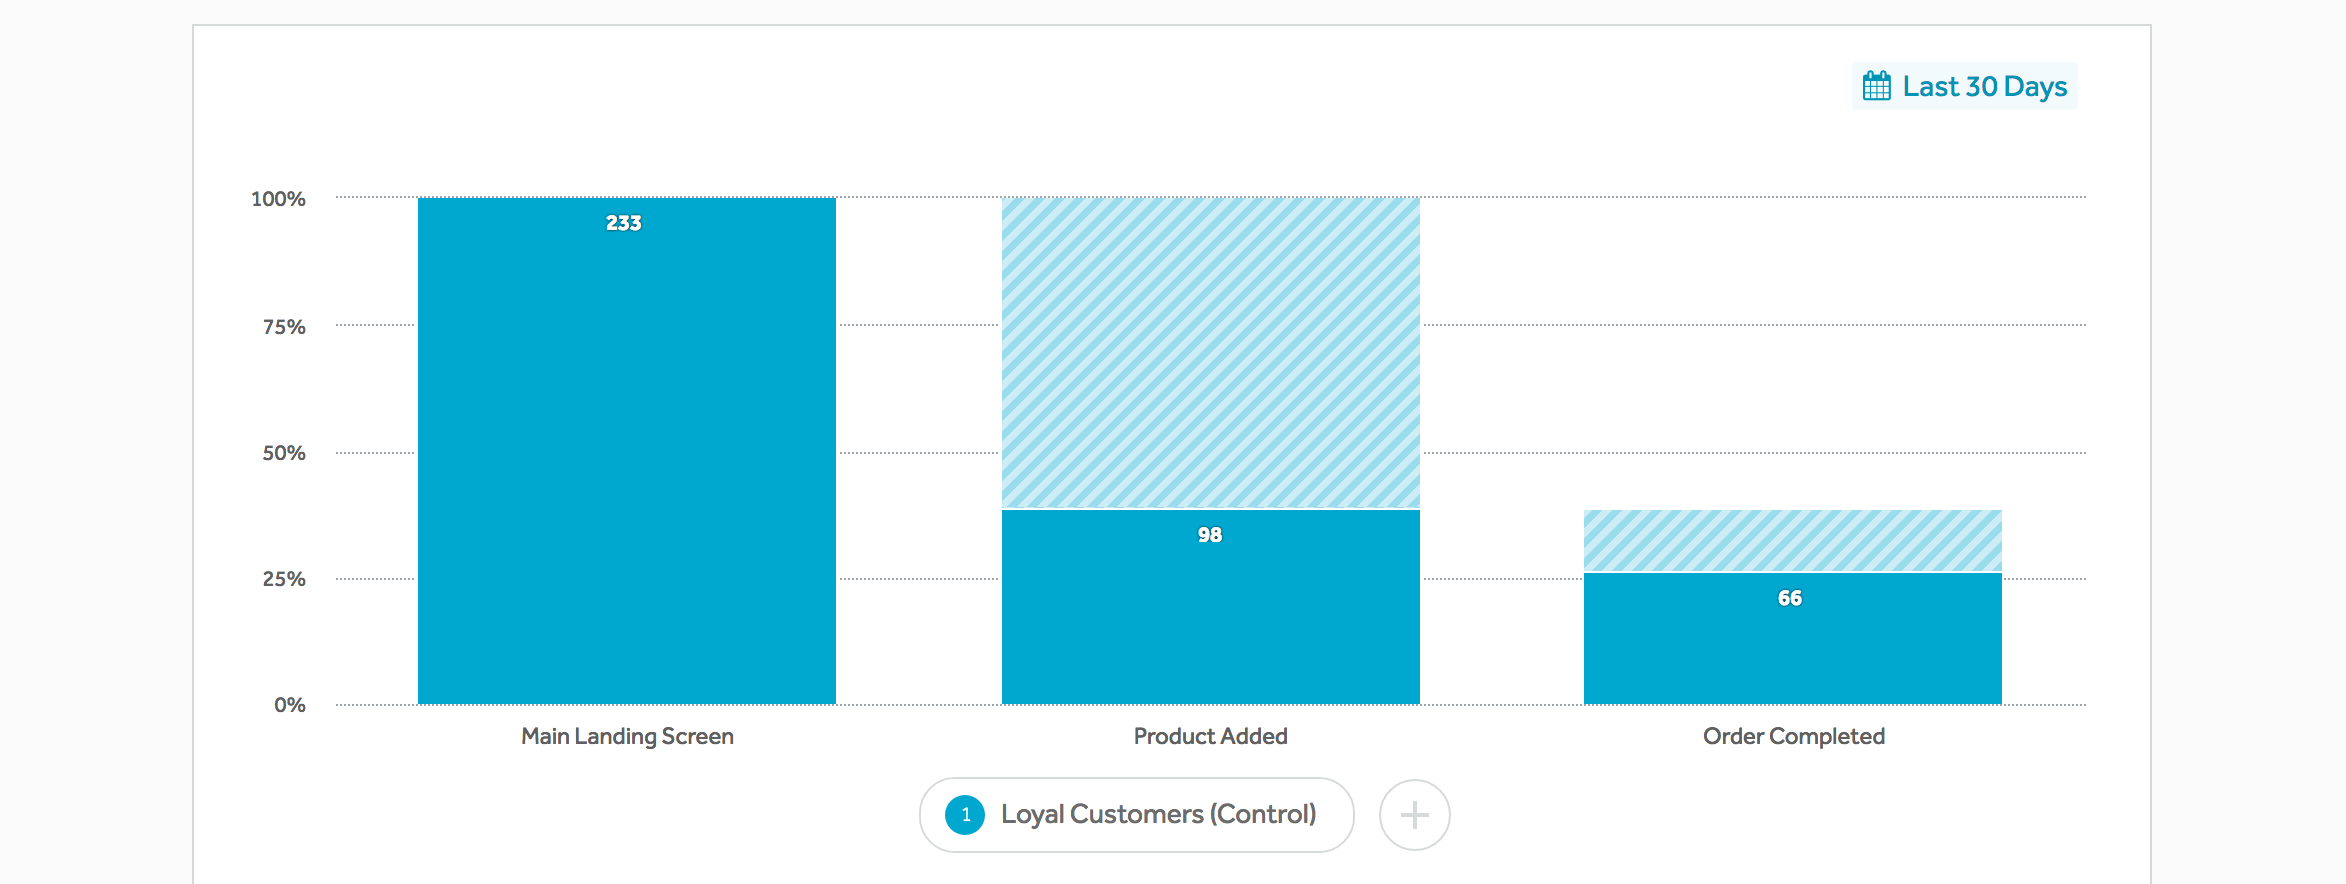 A bar chart showing 233 visits to the main landing screen, 98 products added to cart, and 66 purchases.